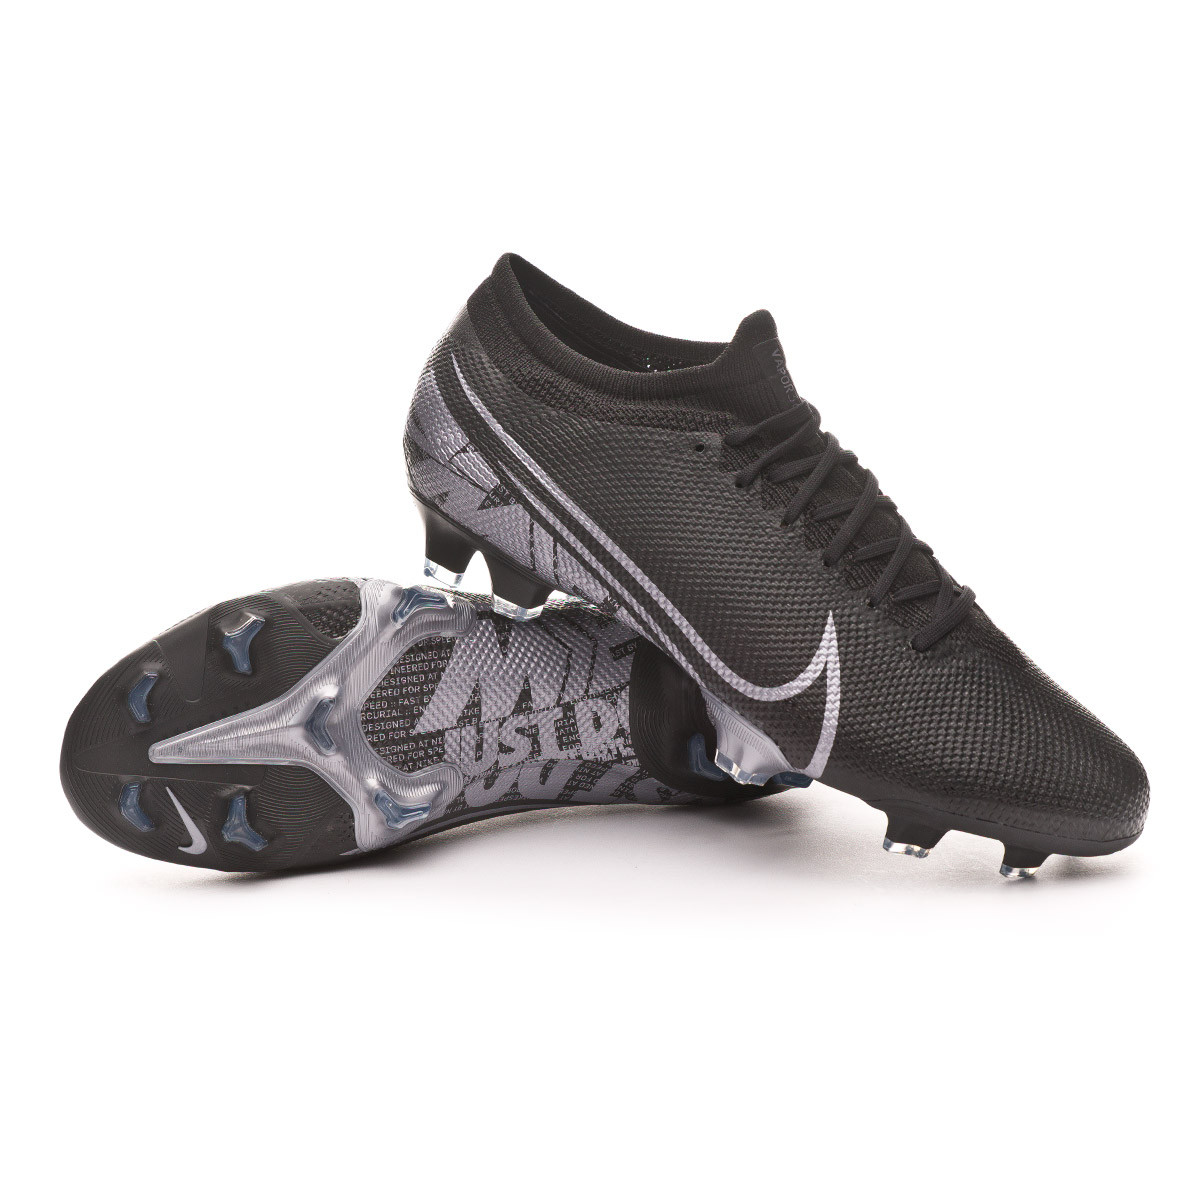 Nike Mercurial Superfly 7 Pro New Lights Pack Review